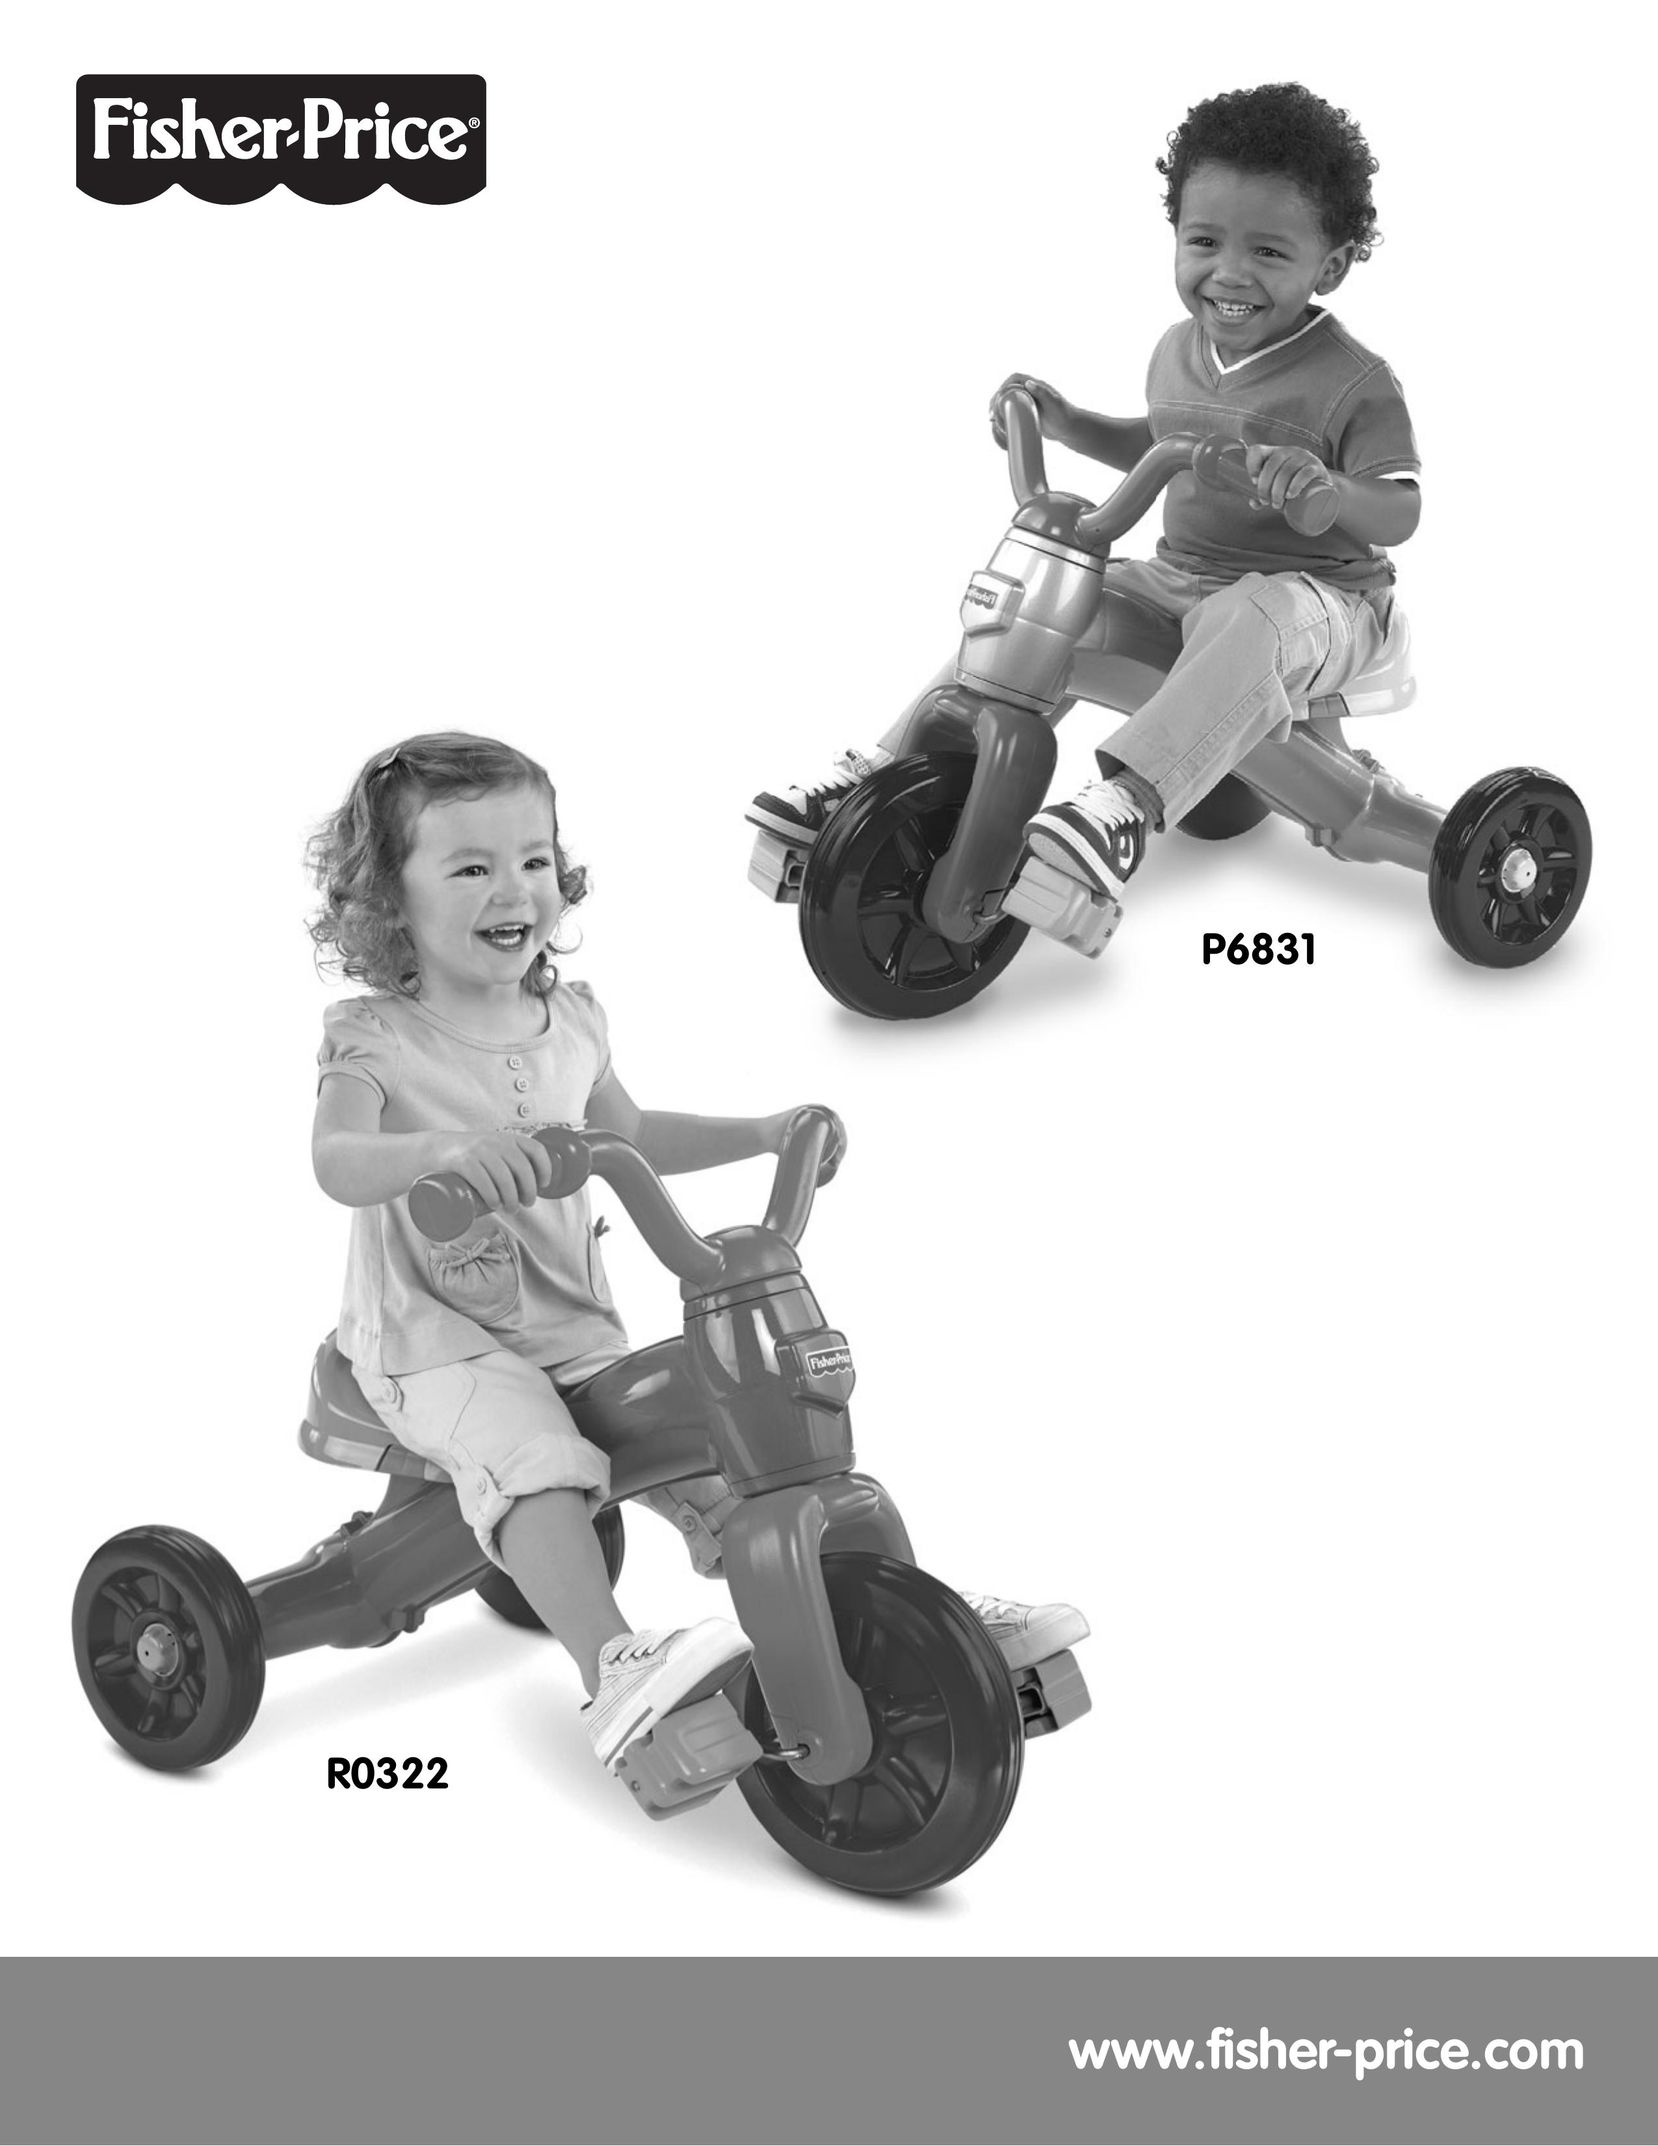 Fisher-Price R0322 Riding Toy User Manual